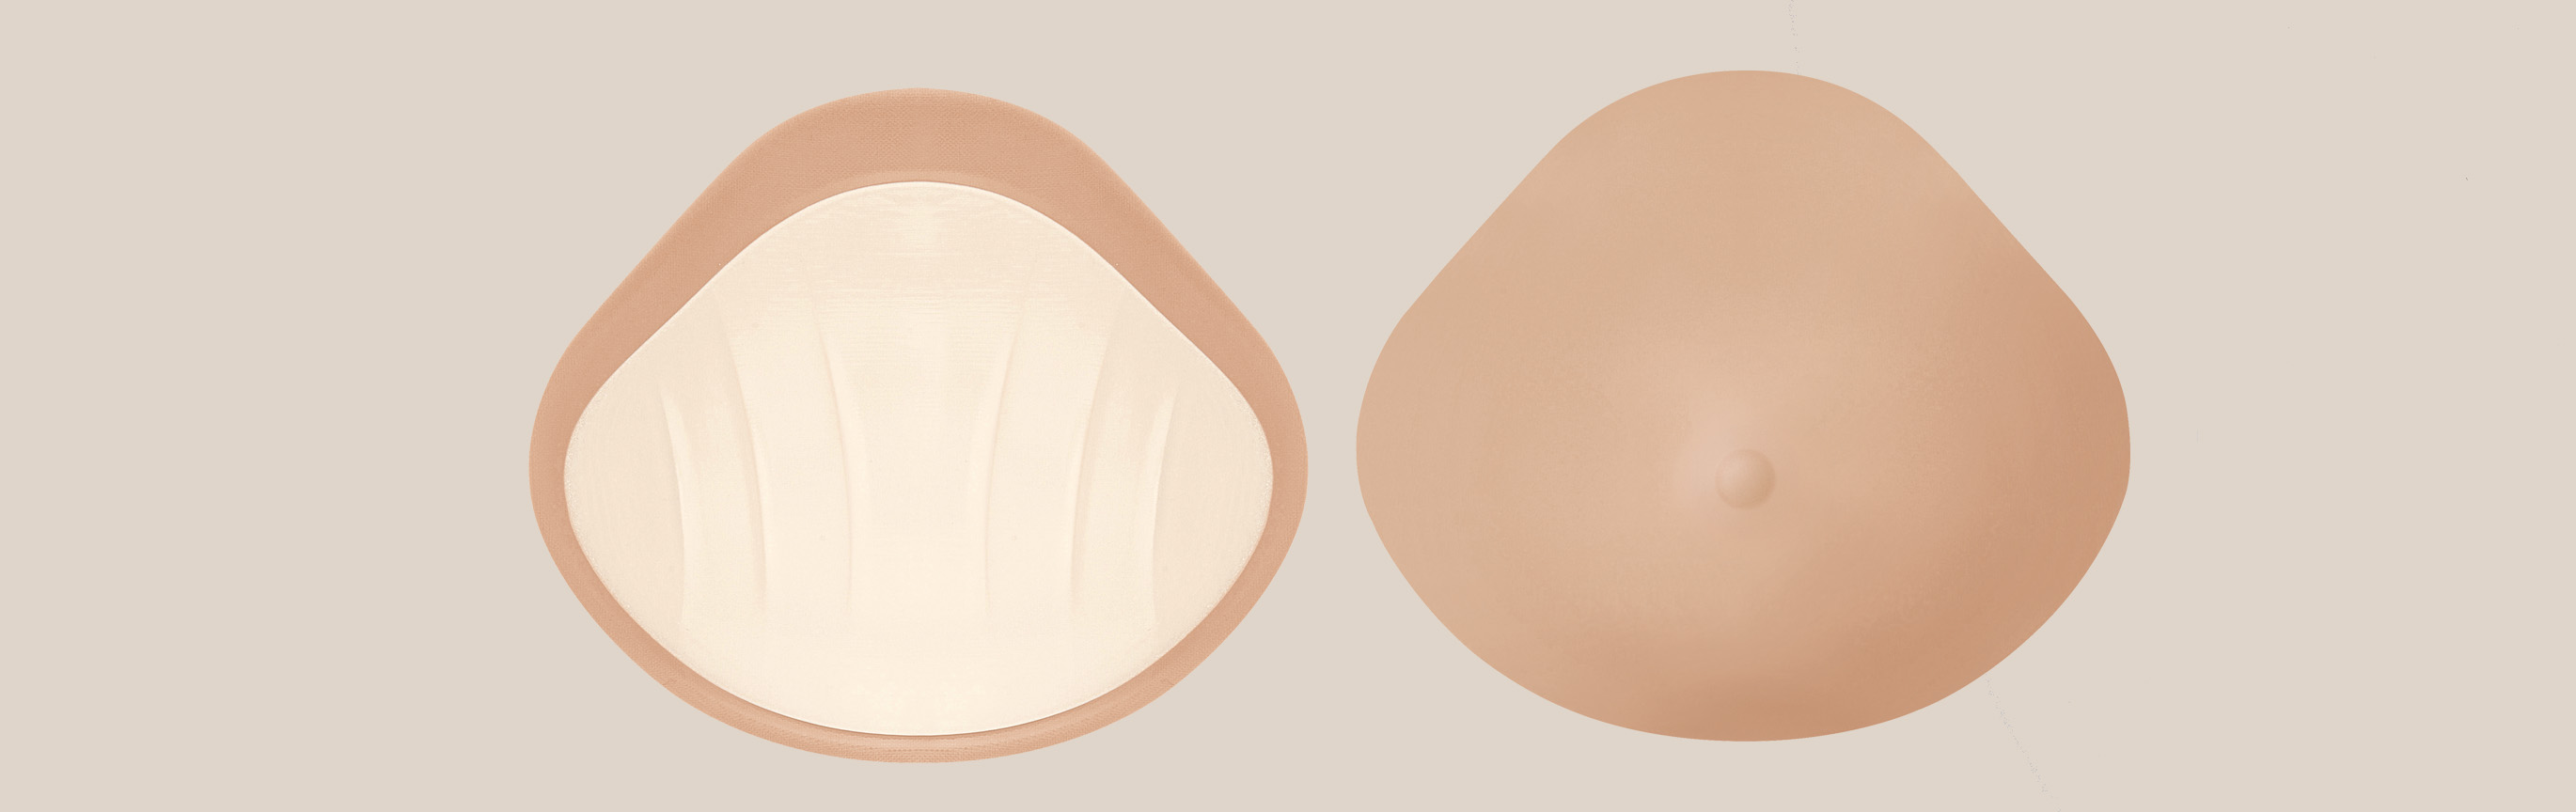 600g Silicone Breast Forms by FEMINIQUE Size 32D 34C 36B Size 5 